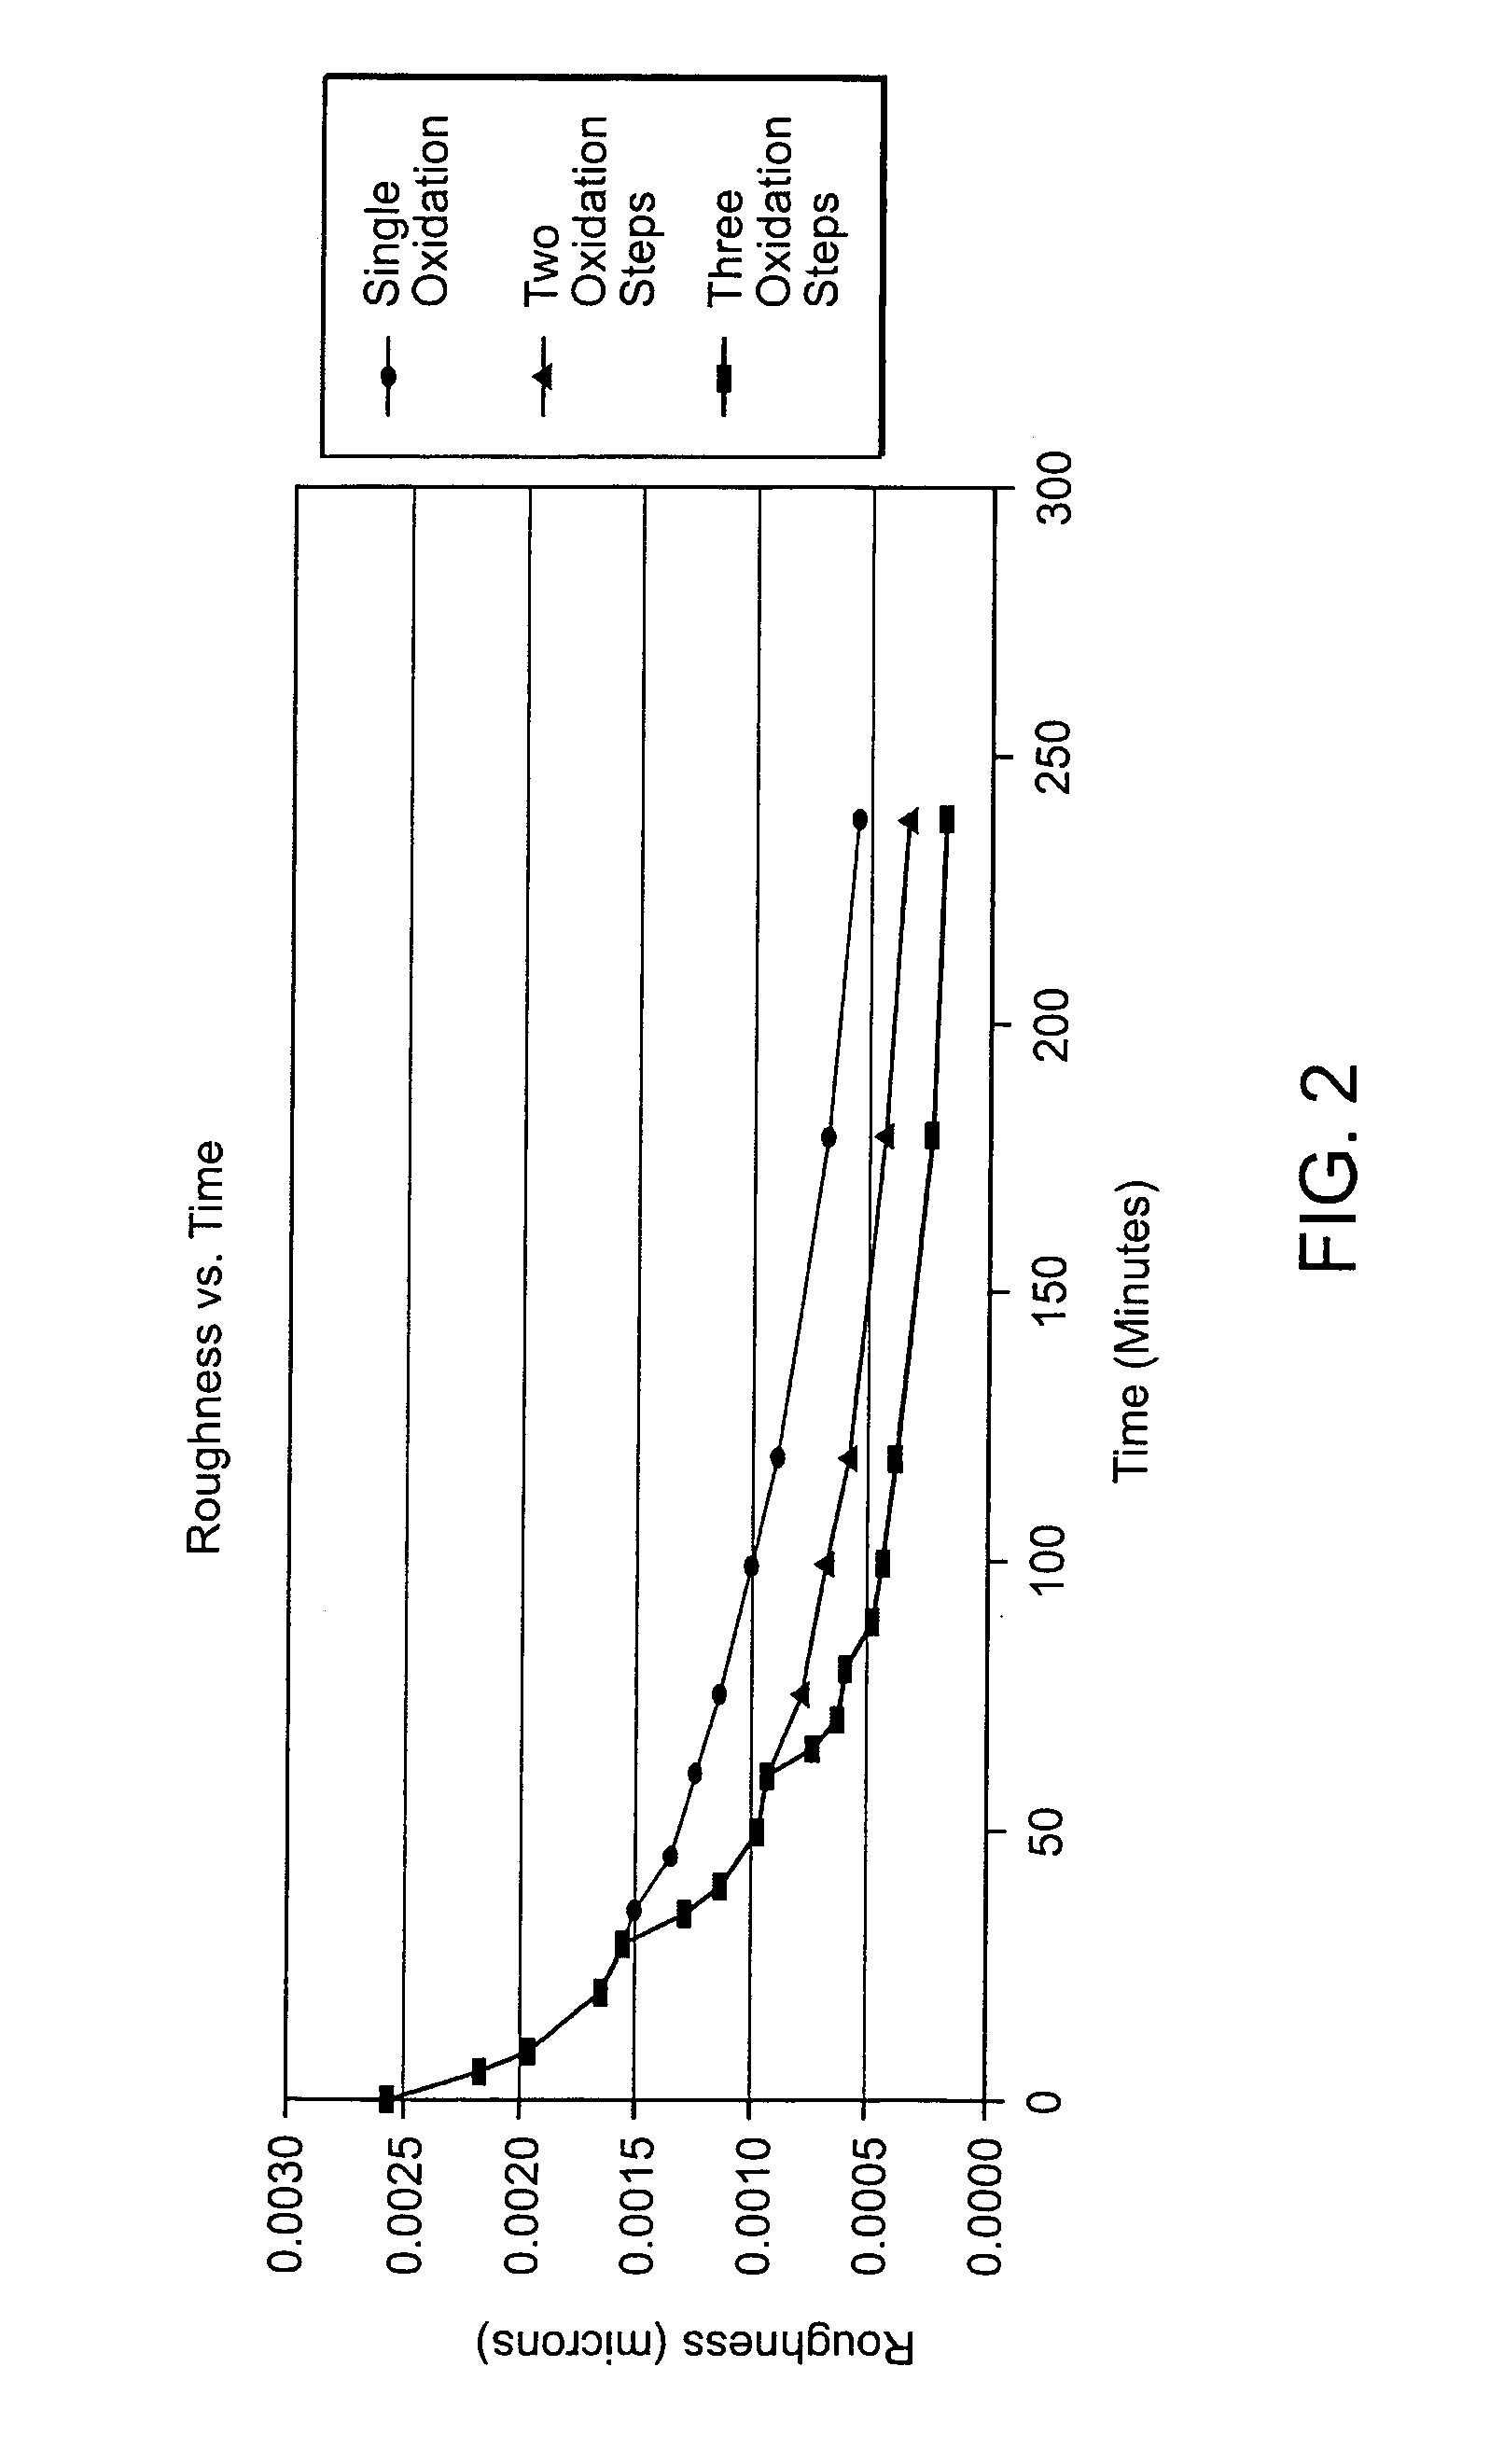 Multiple oxidation smoothing method for reducing silicon waveguide roughness